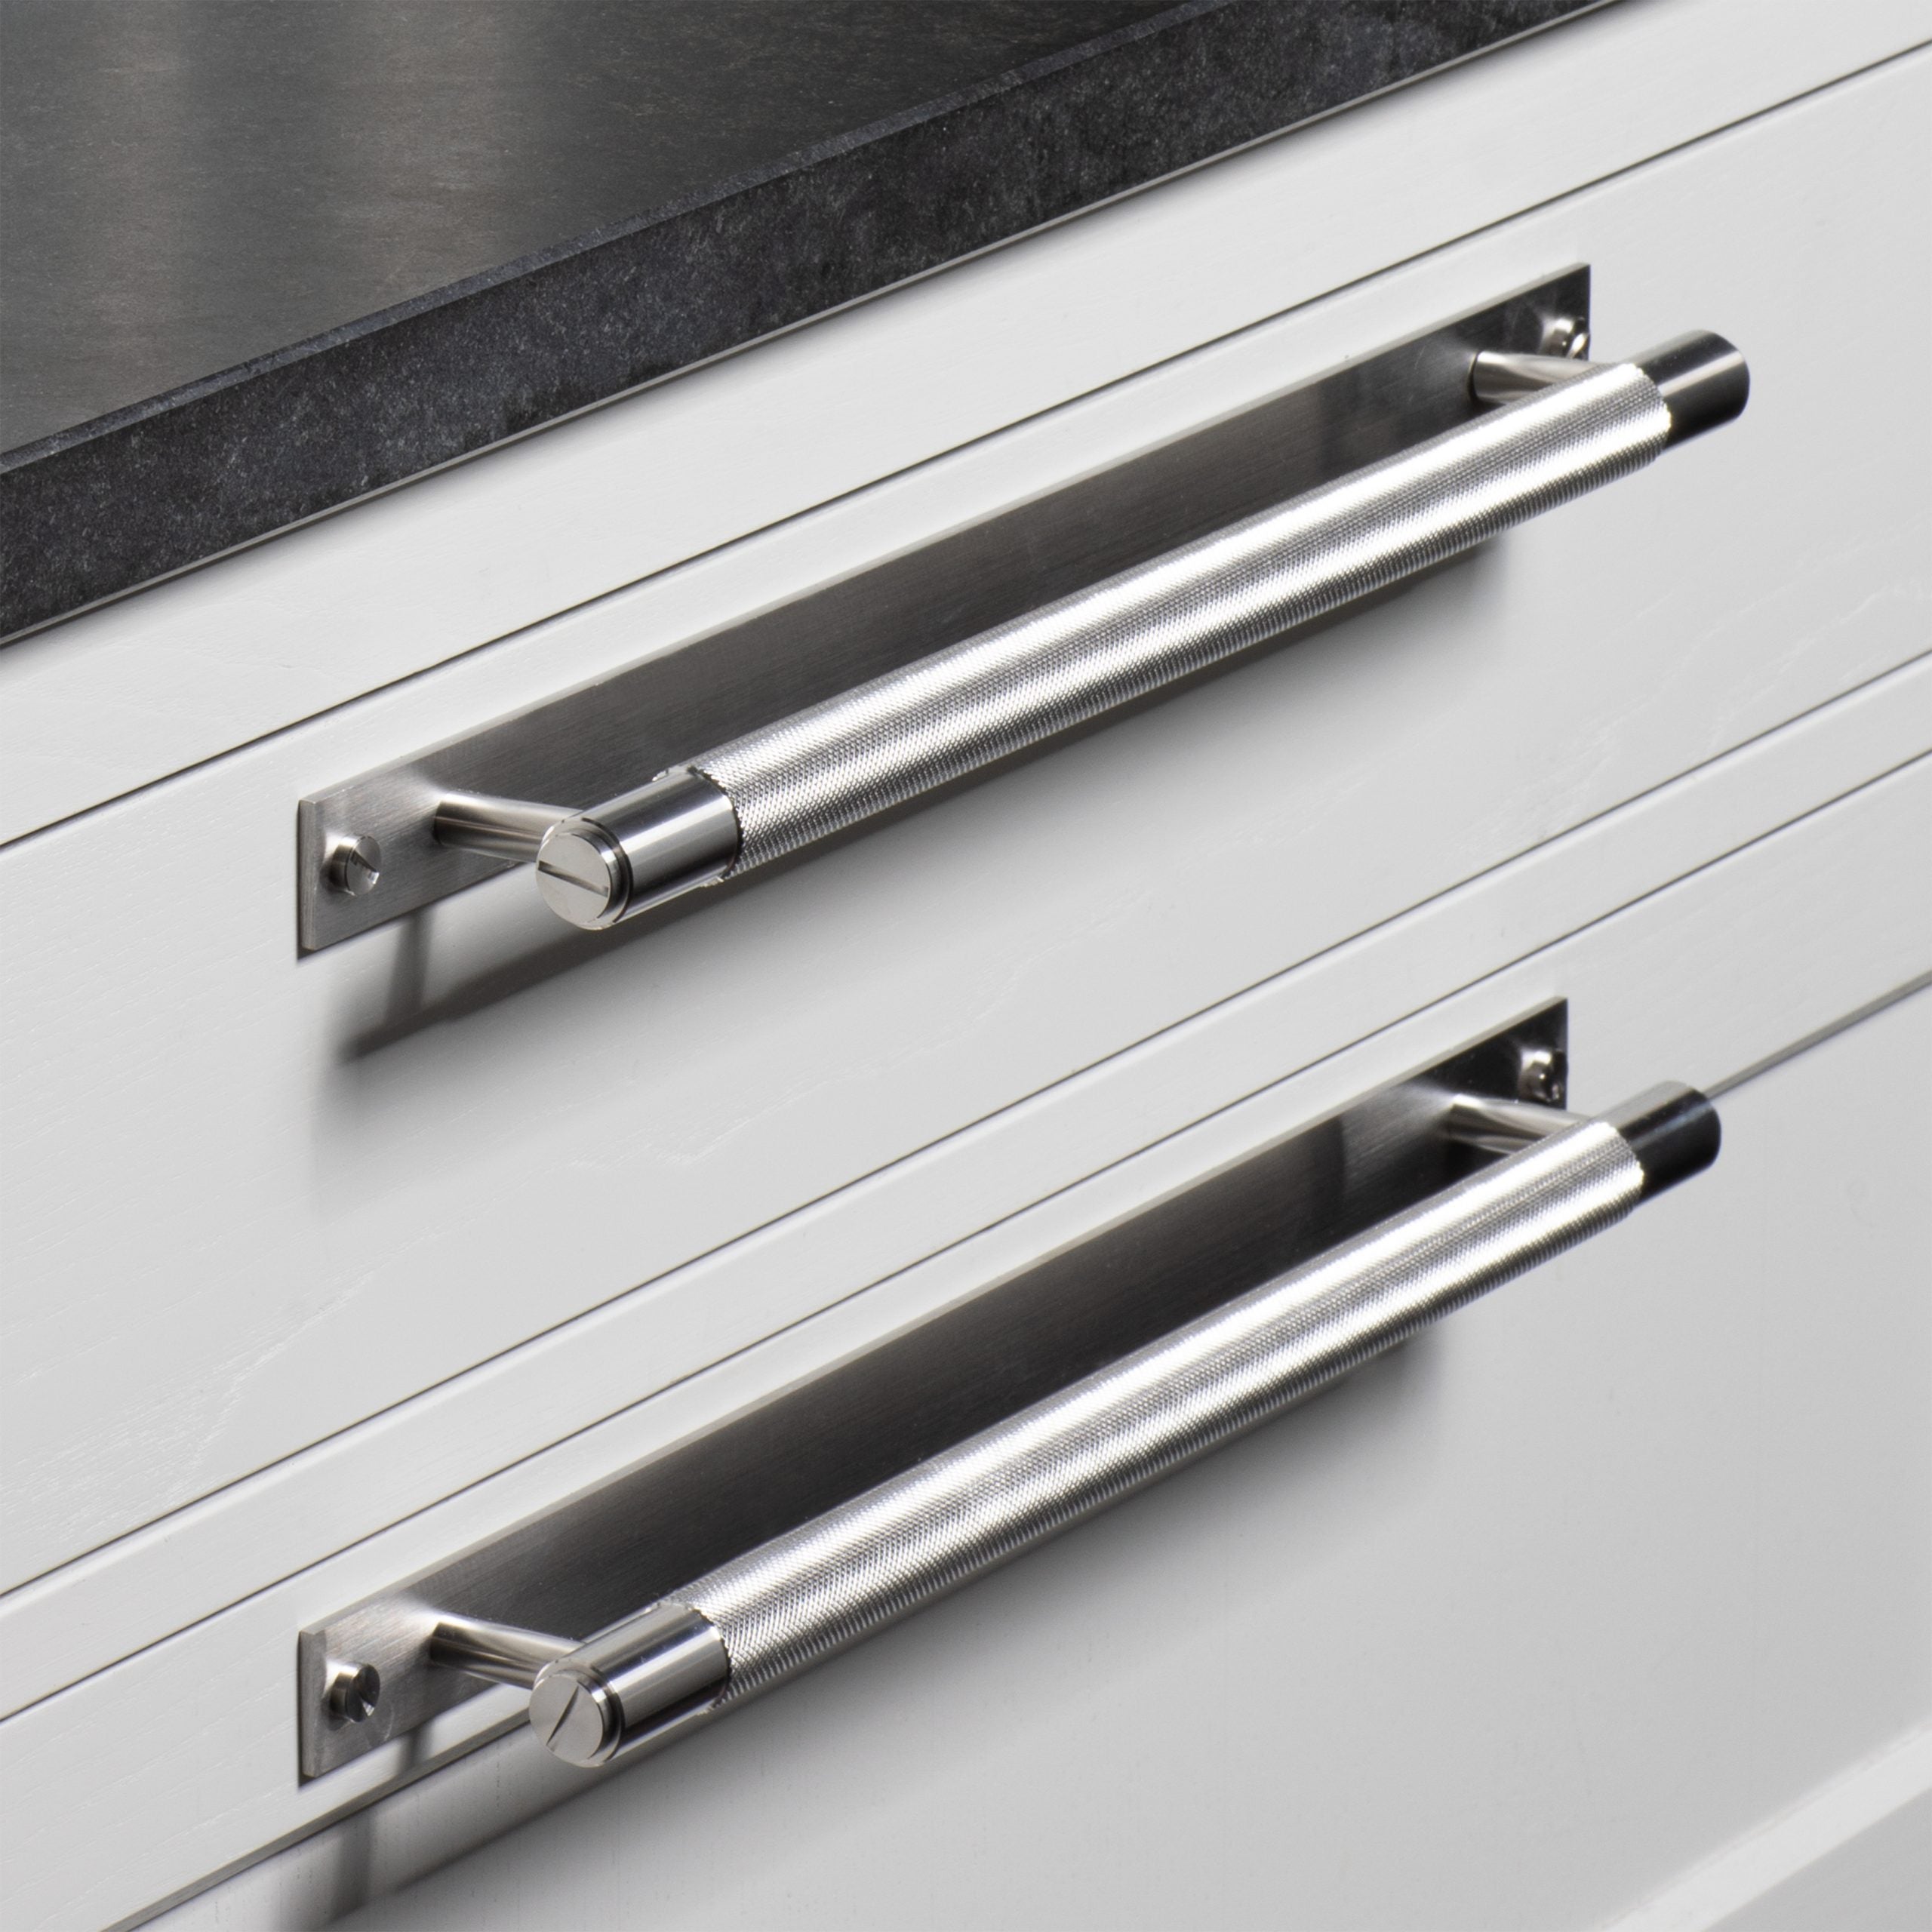 Buster + Punch Pull Bar, Linear Design